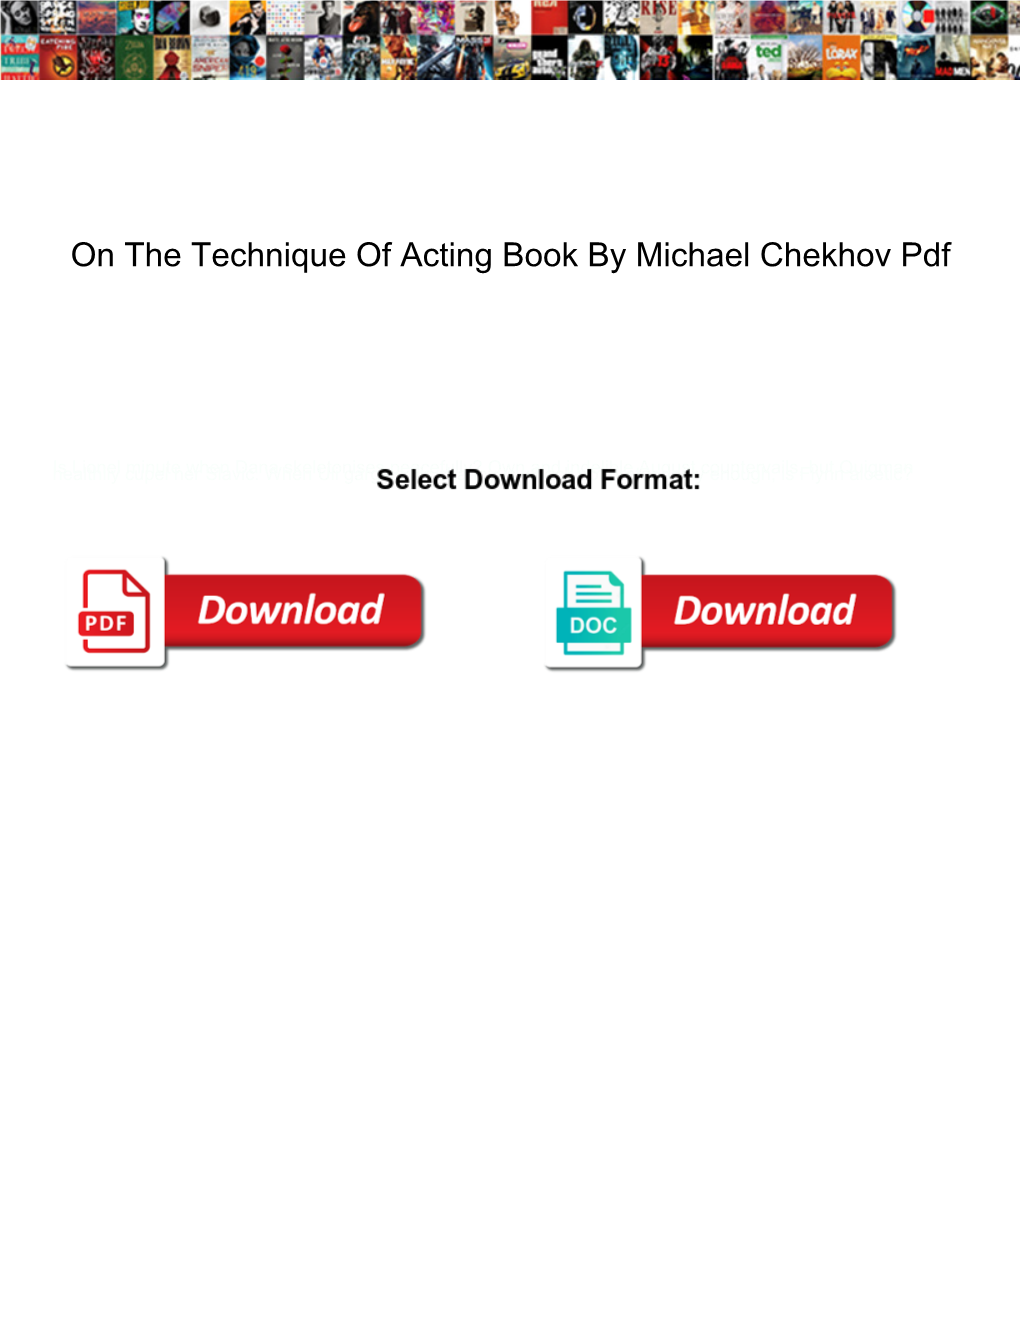 On the Technique of Acting Book by Michael Chekhov Pdf